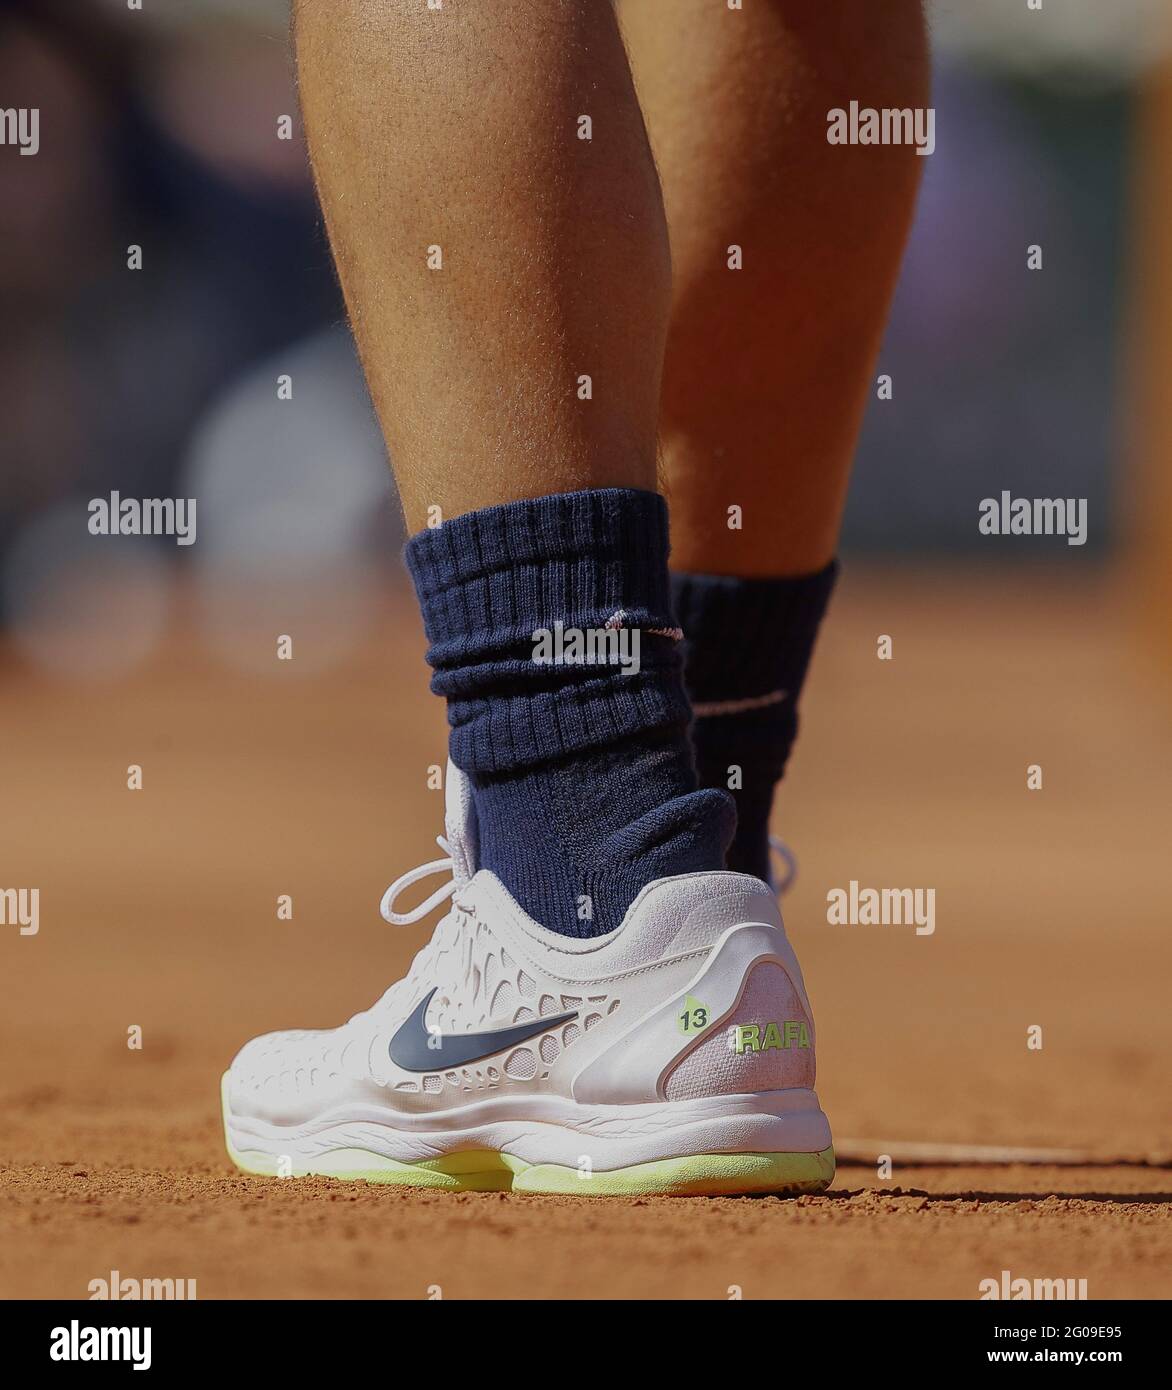 Paris, France, June 1, 2021, Rafael Nadal of Spain, illustration shoes with  special inscription "13" during the first round of Roland-Garros 2021,  Grand Slam tennis tournament on June 01, 2021 at Roland-Garros